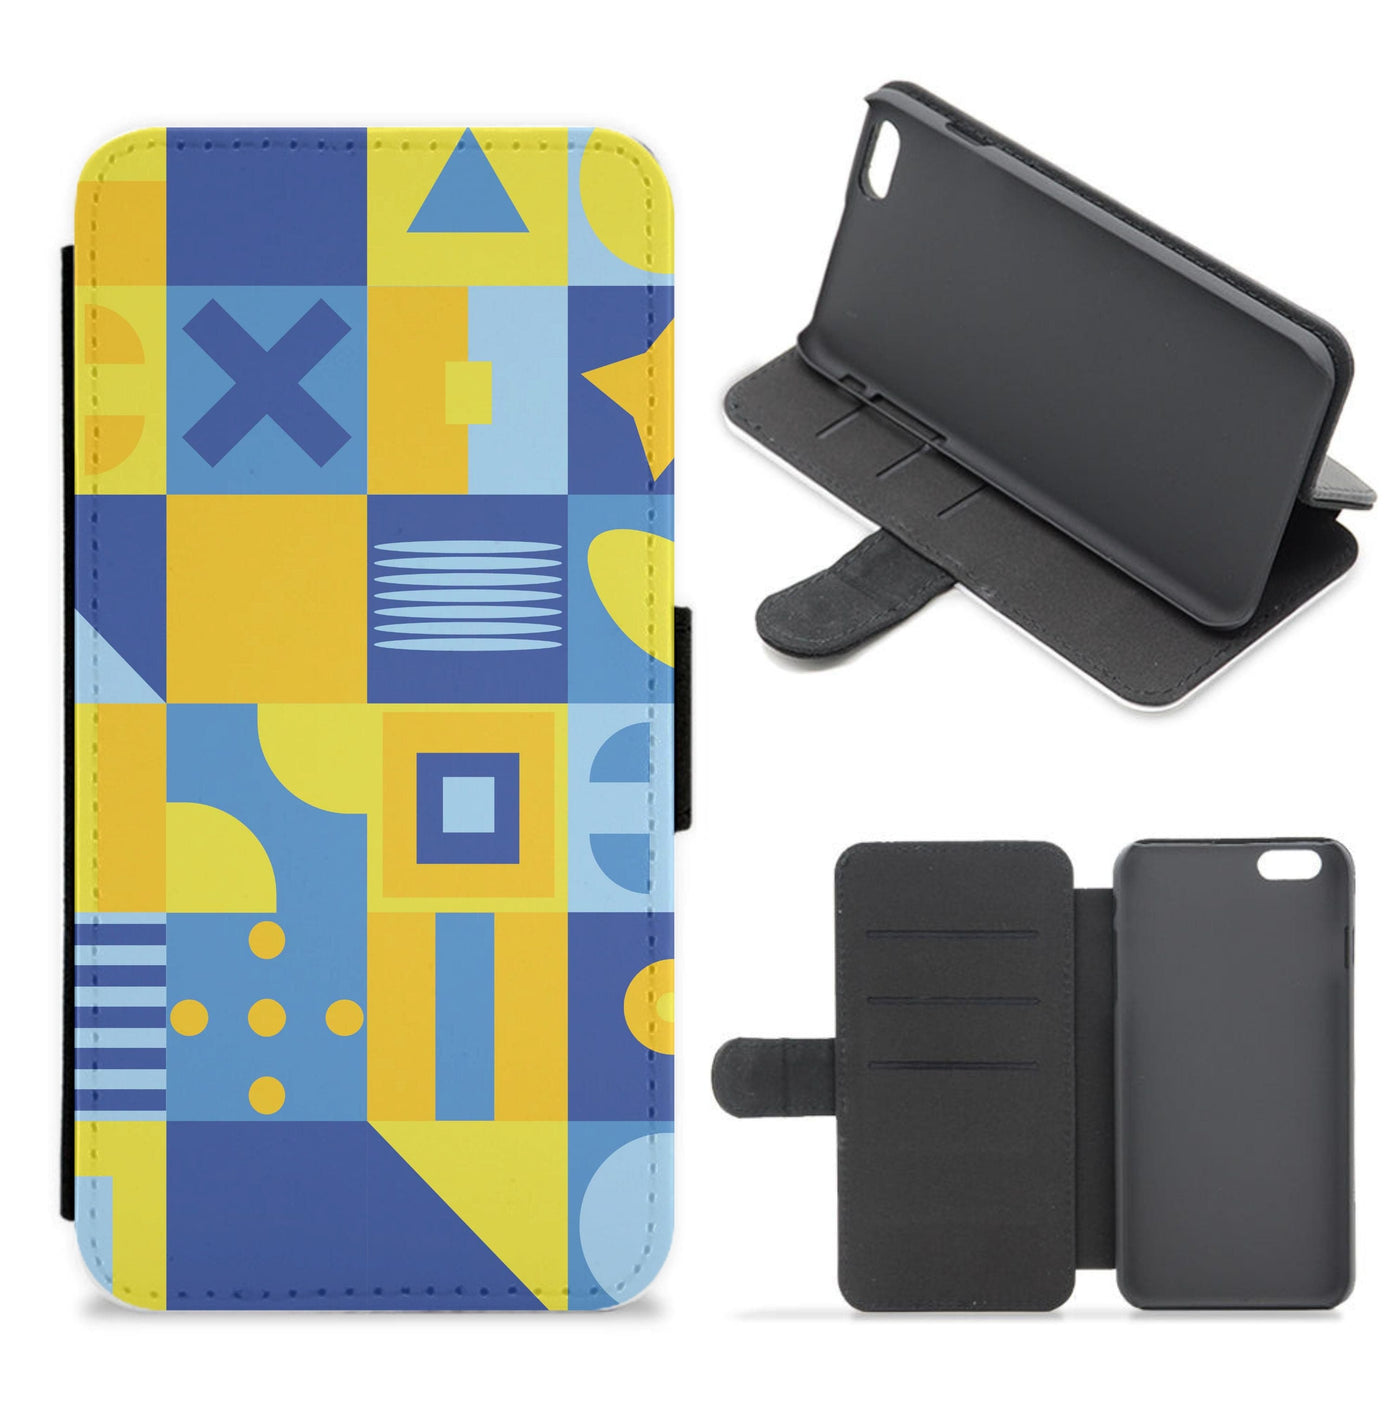 Abstract Pattern 19 Flip / Wallet Phone Case